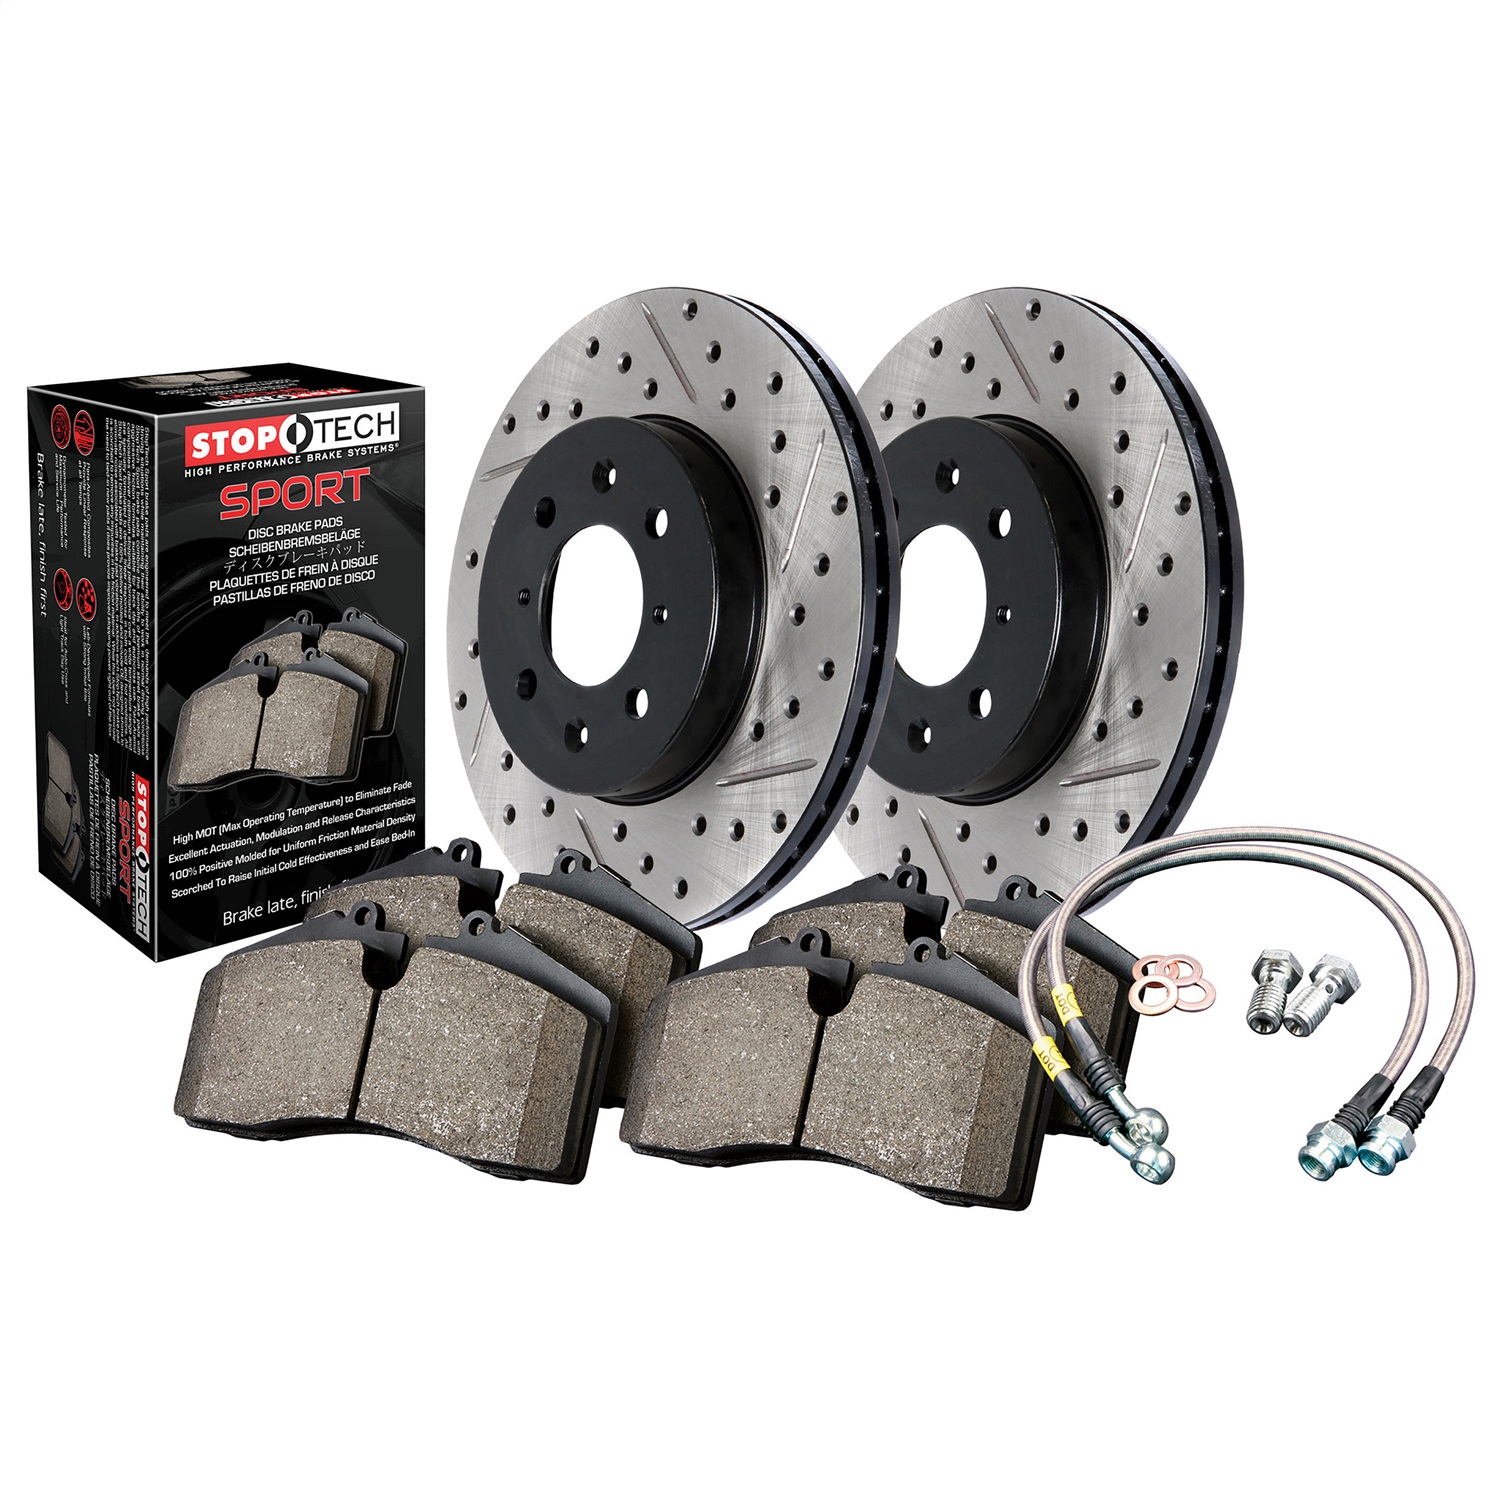 StopTech 978.45001F Sport Disc Brake Kit w/Cross-Drilled And Slotted Rotors